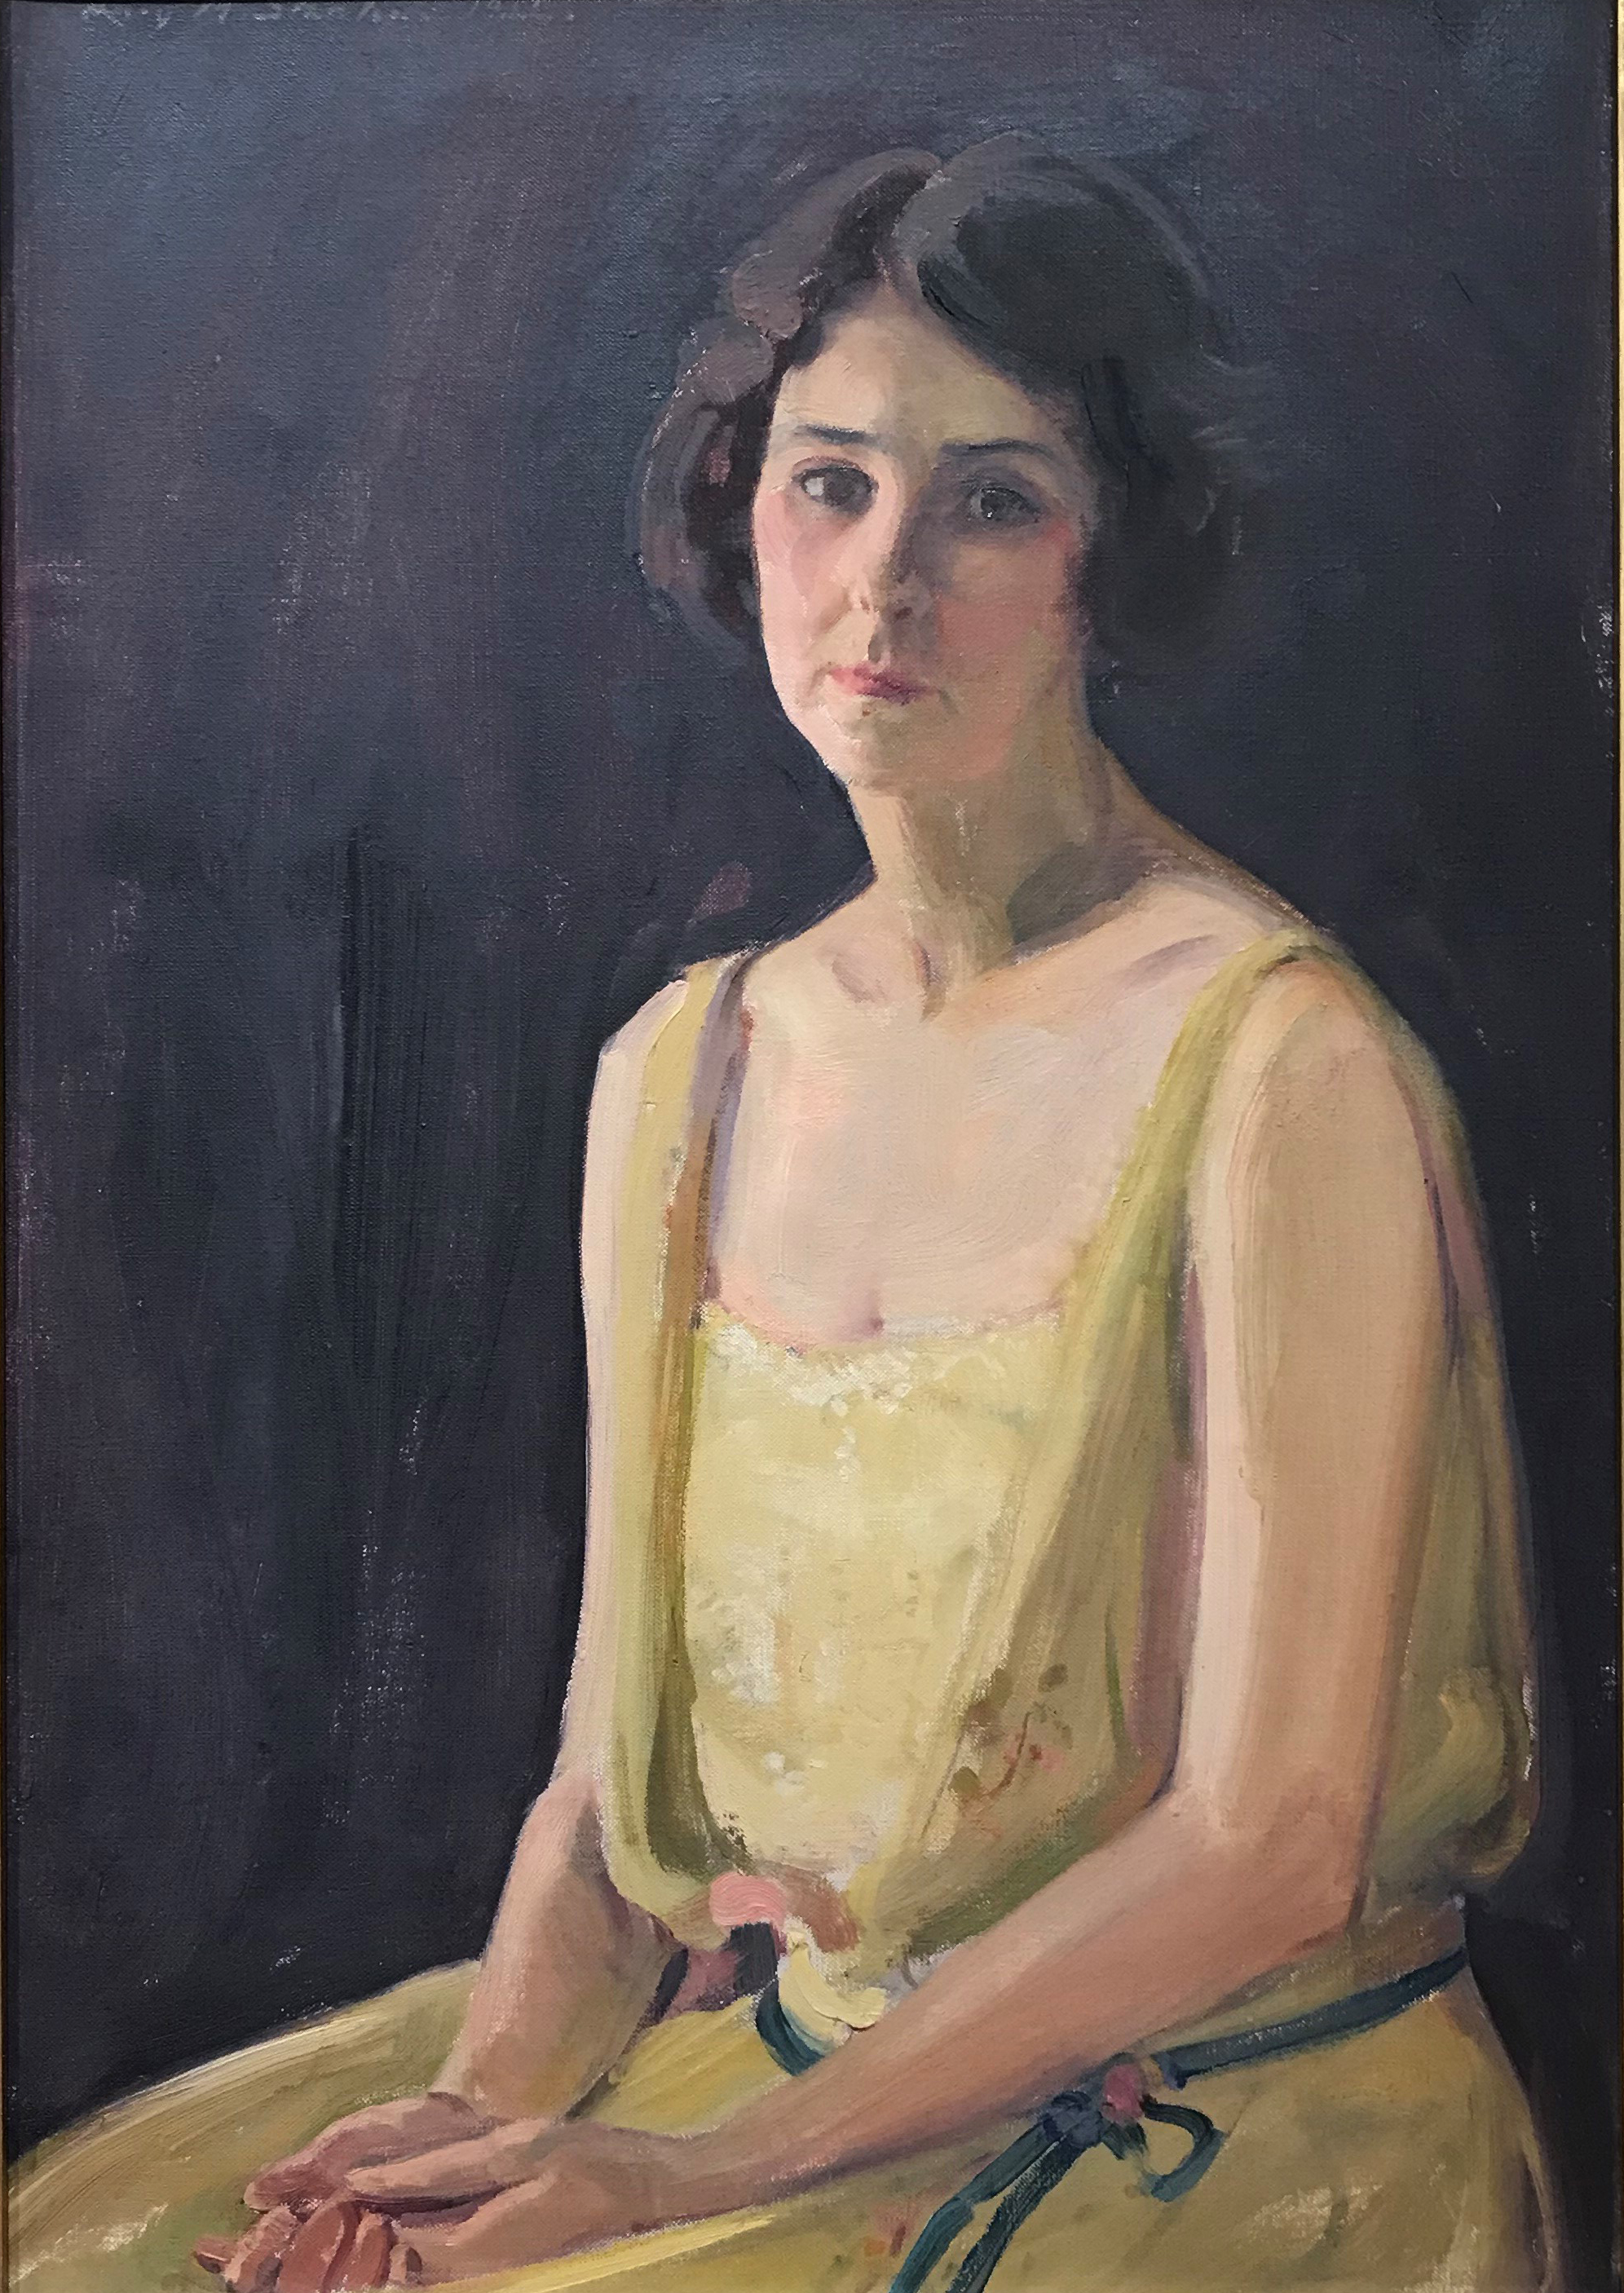 Elizabeth Peyton Stanton by Lucy May Stanton - 1922 - 64.8 × 44.8 cm 